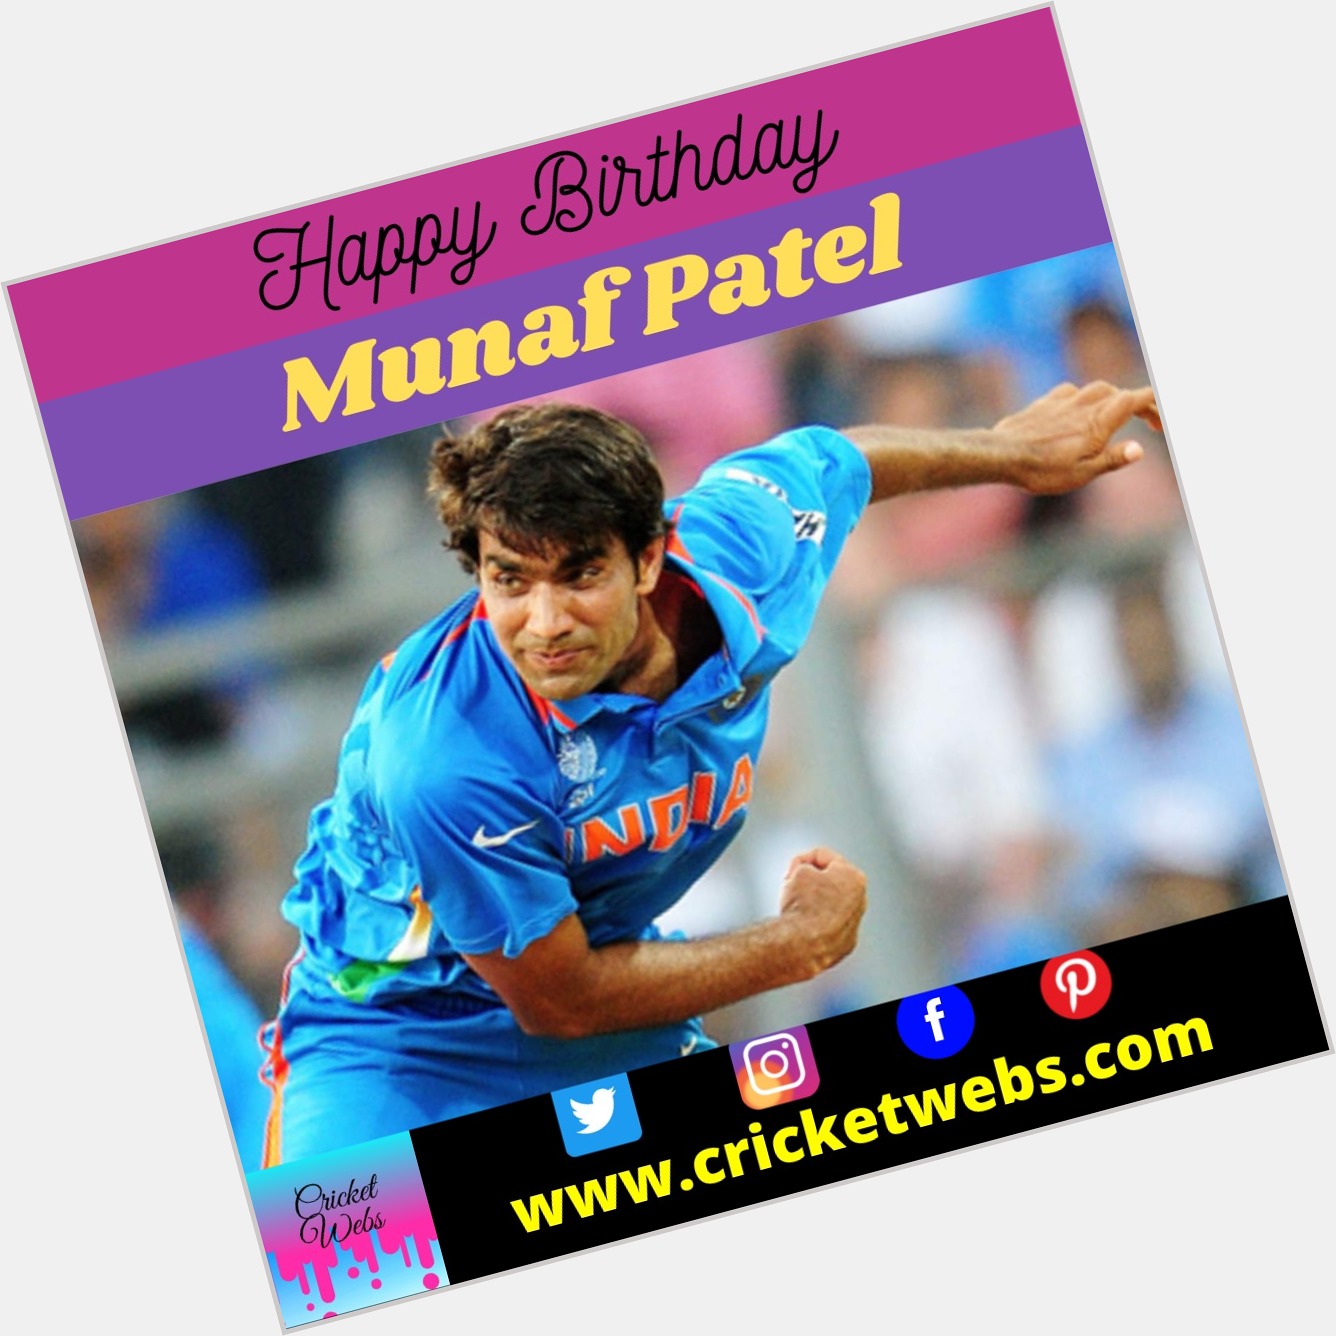 An injury-prone Indian fast bowler is born on this day. Happy Birthday Munaf Patel 